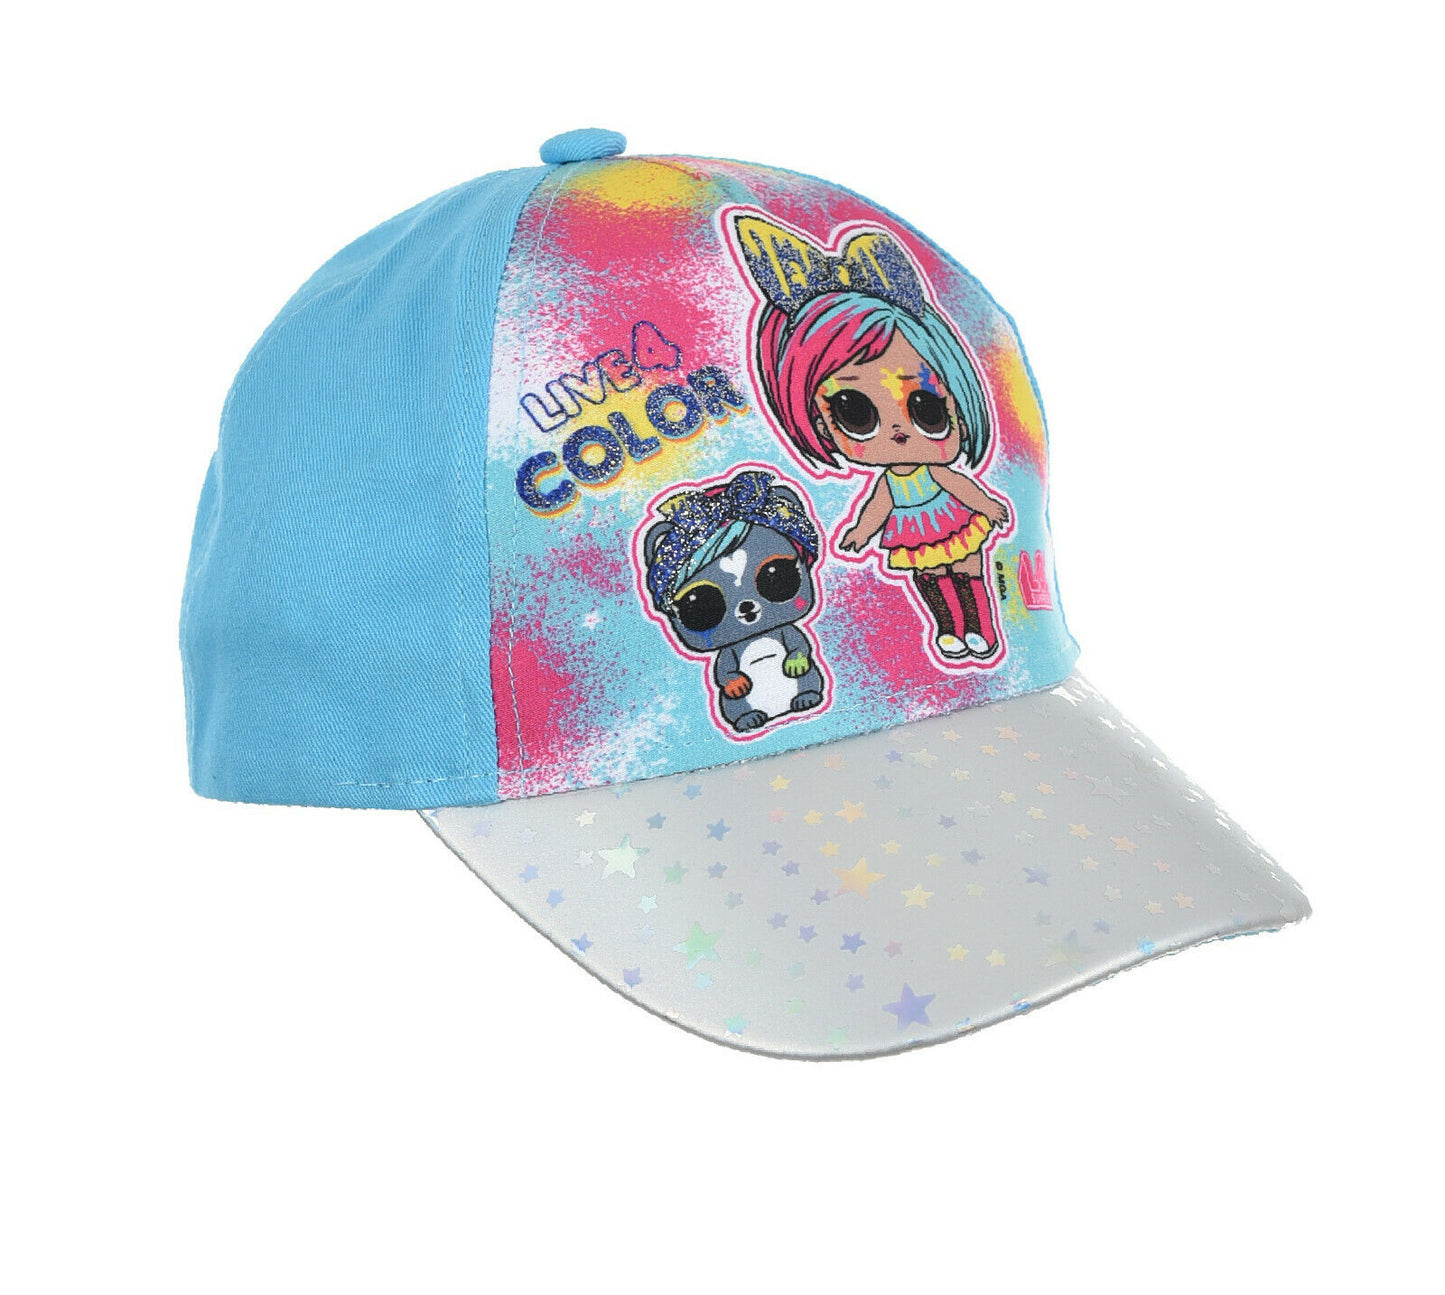 Girls L.O.L Surprise Summer Baseball Cap. This Bright And Colourful Turquoise Cap Is Perfect For The Summer Months Ahead. Available Also In Pink. Available In Ages 2-4 (52cm) Or 4-8 (54cm). Every L.O.L Fan Will Love One Of These Caps.